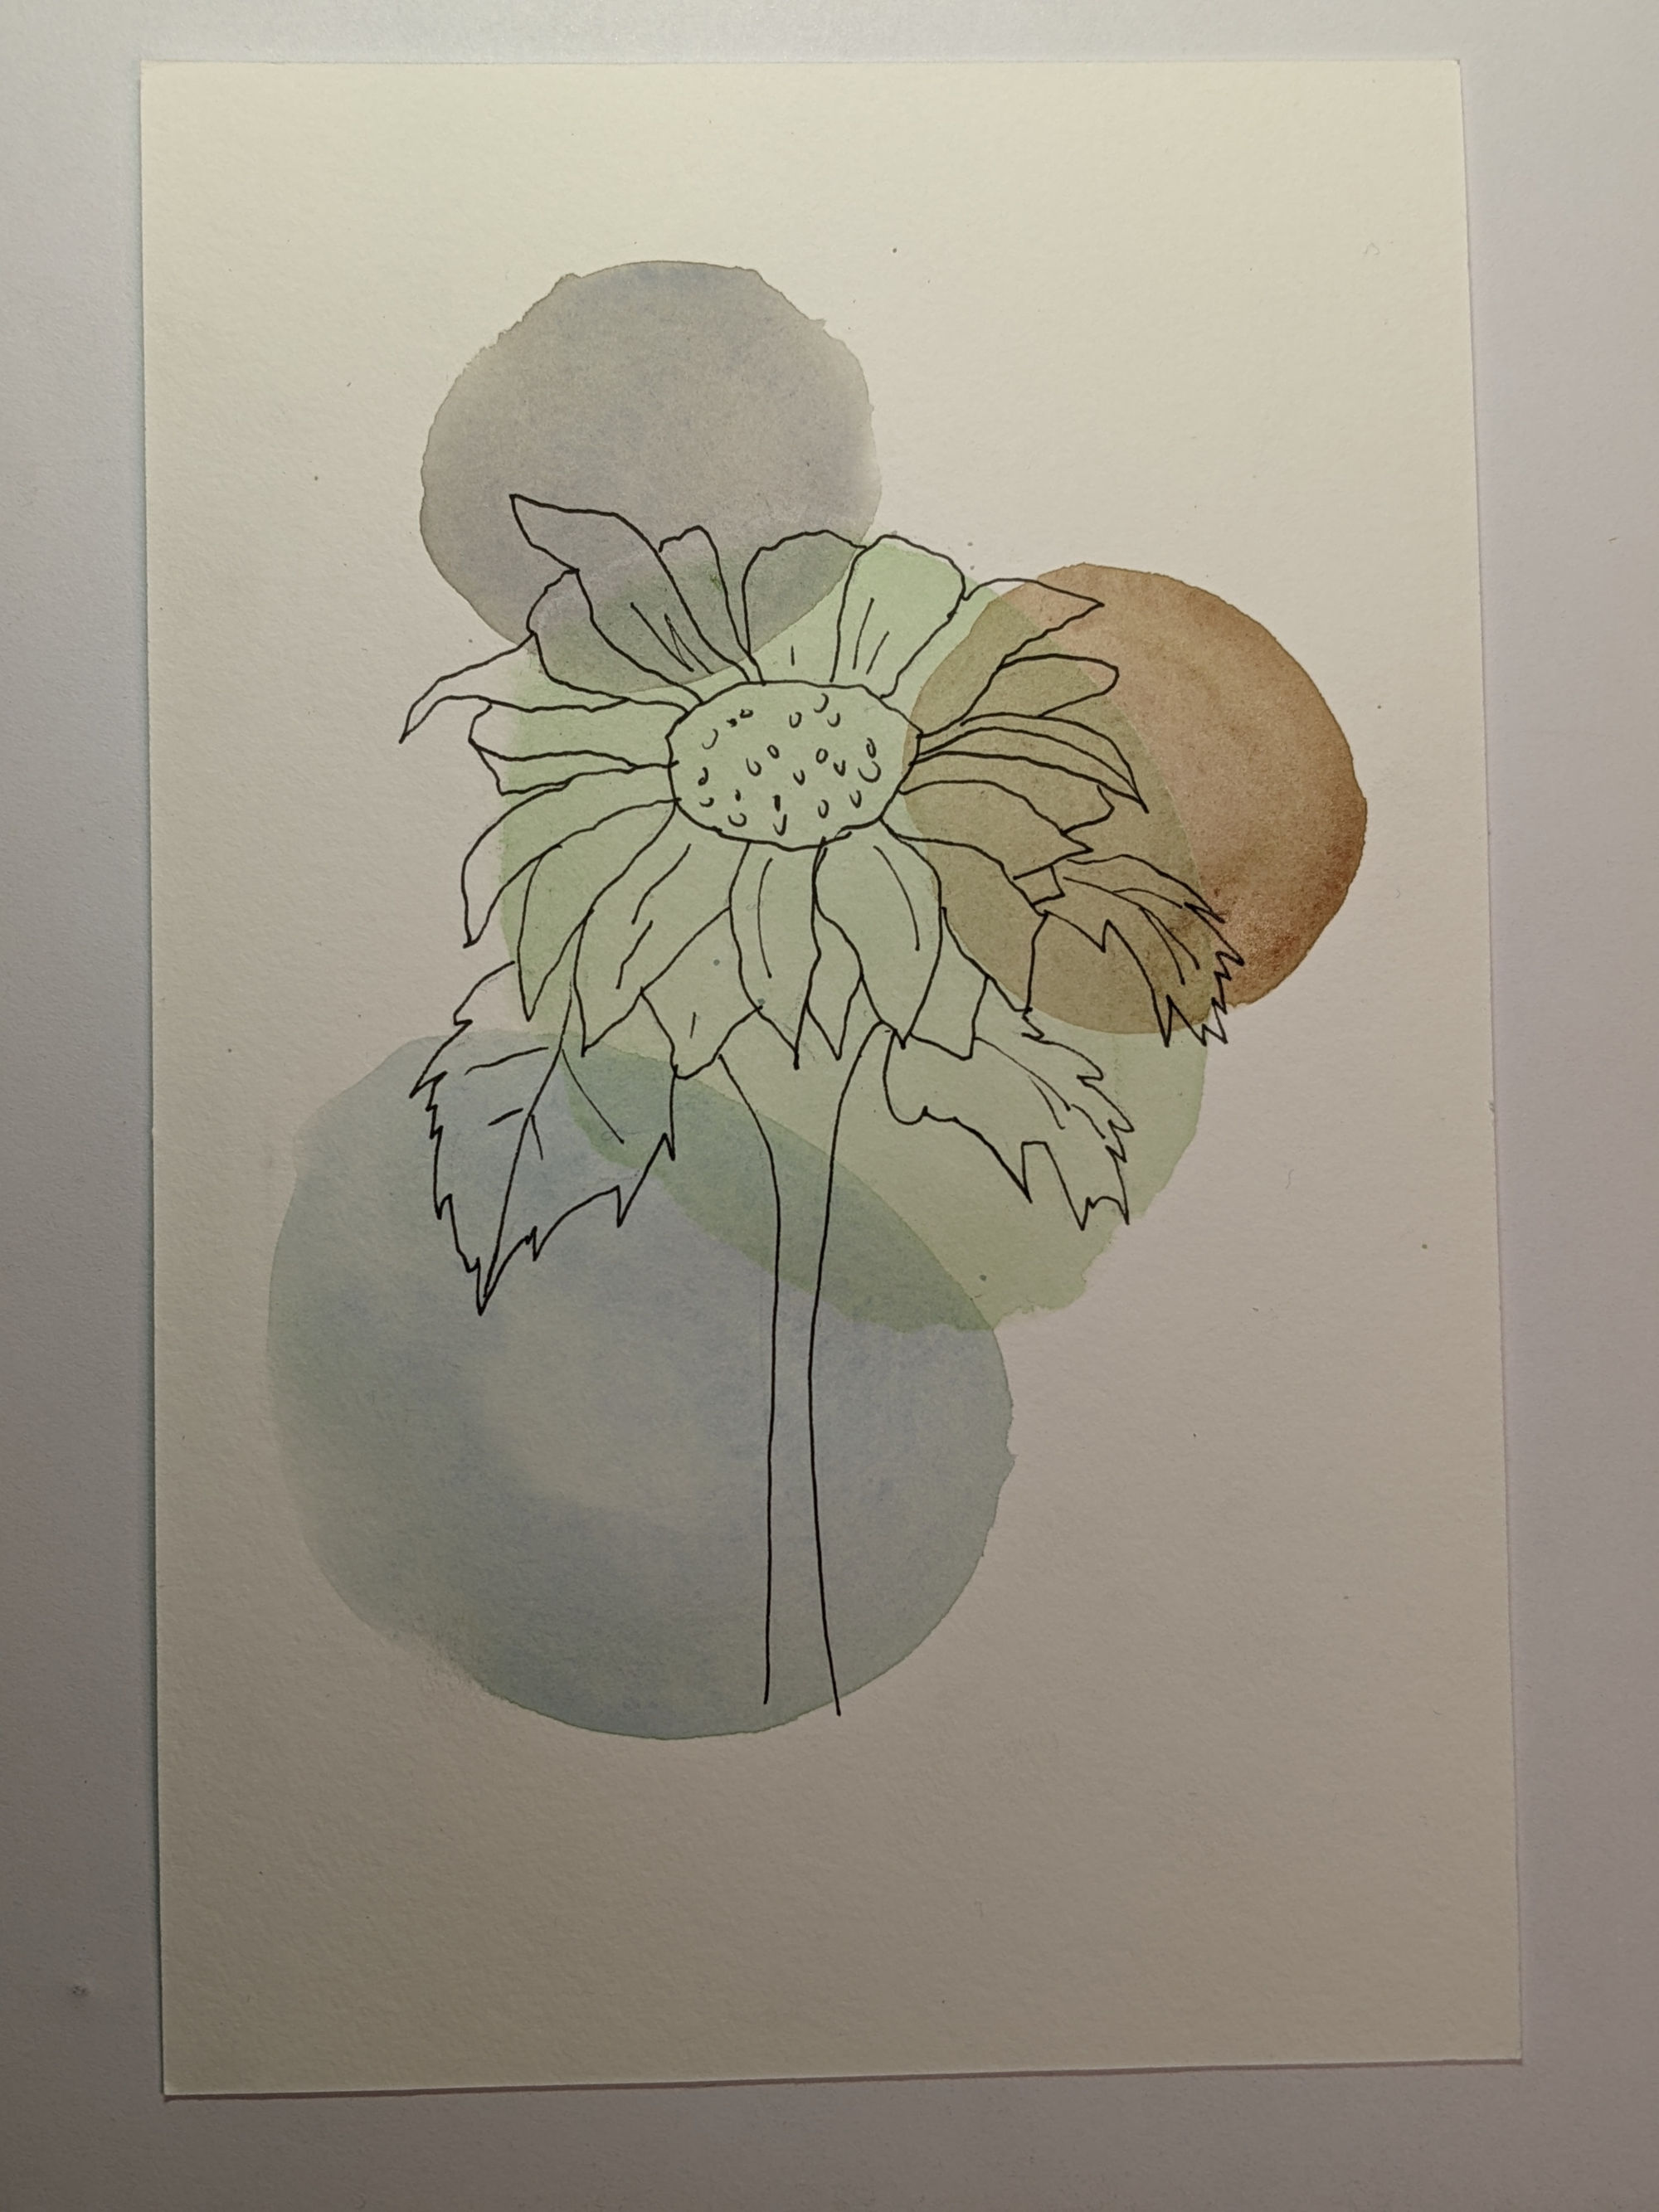 Inked flower with abstract geometric watercolor art.